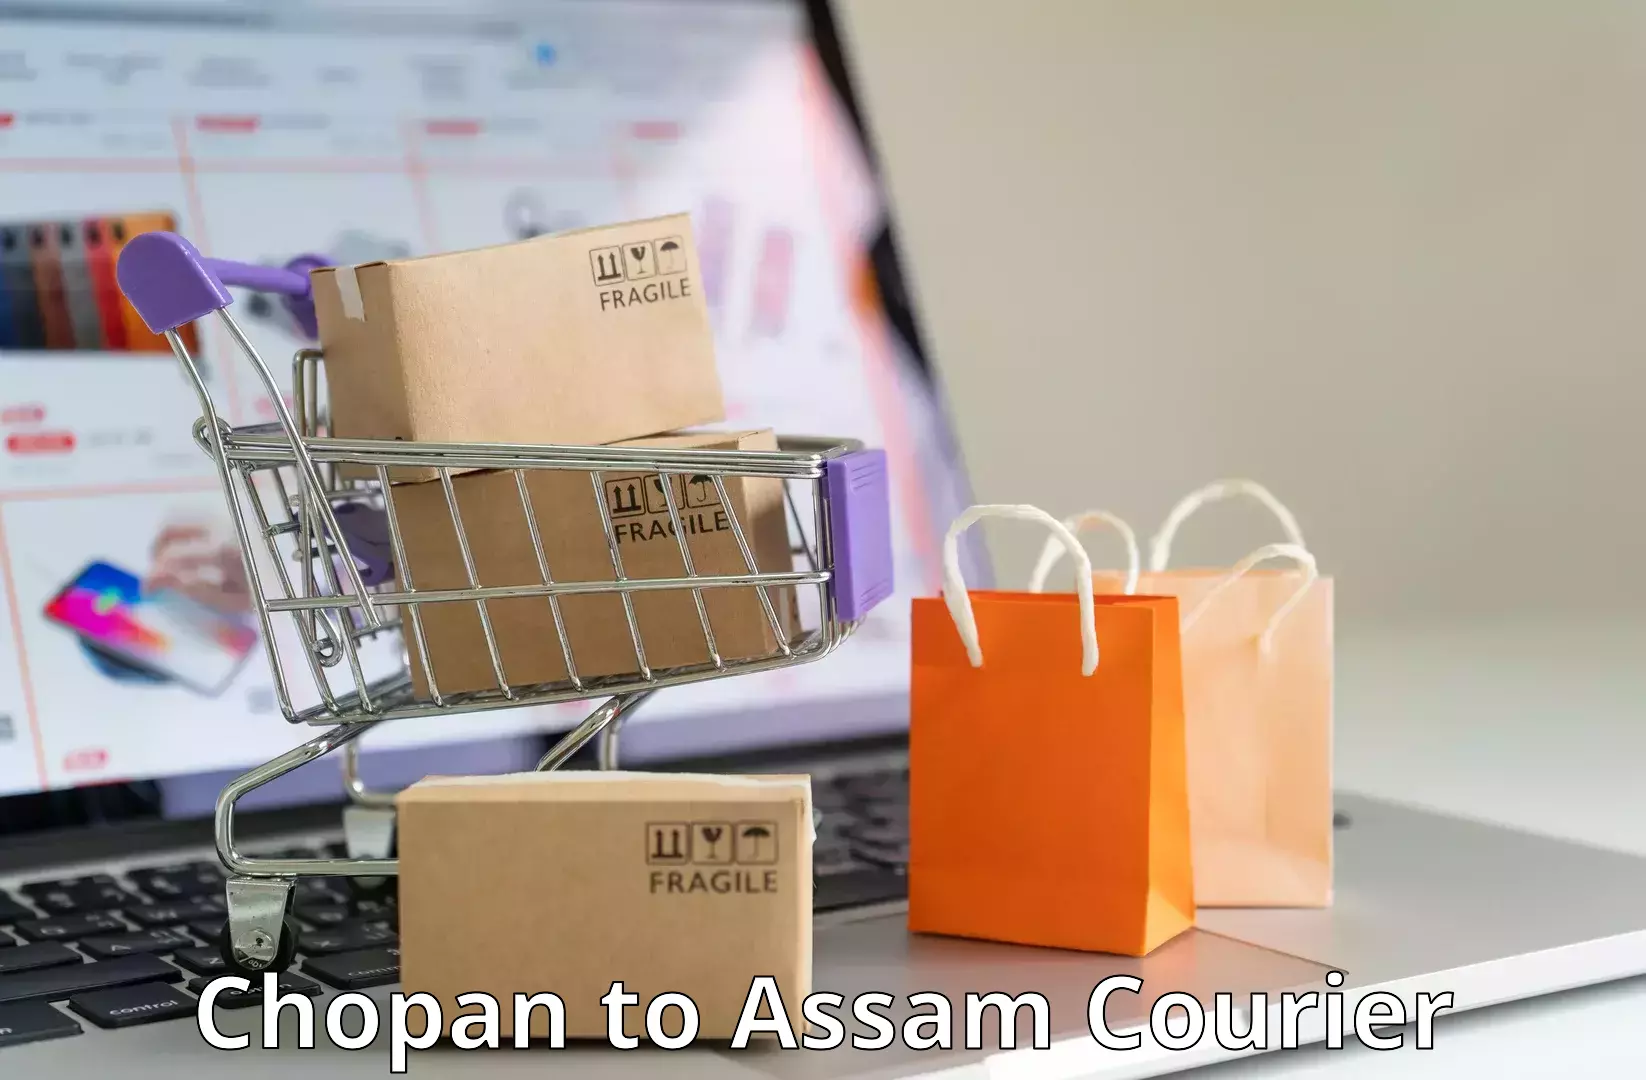 Scalable shipping solutions Chopan to Lala Assam